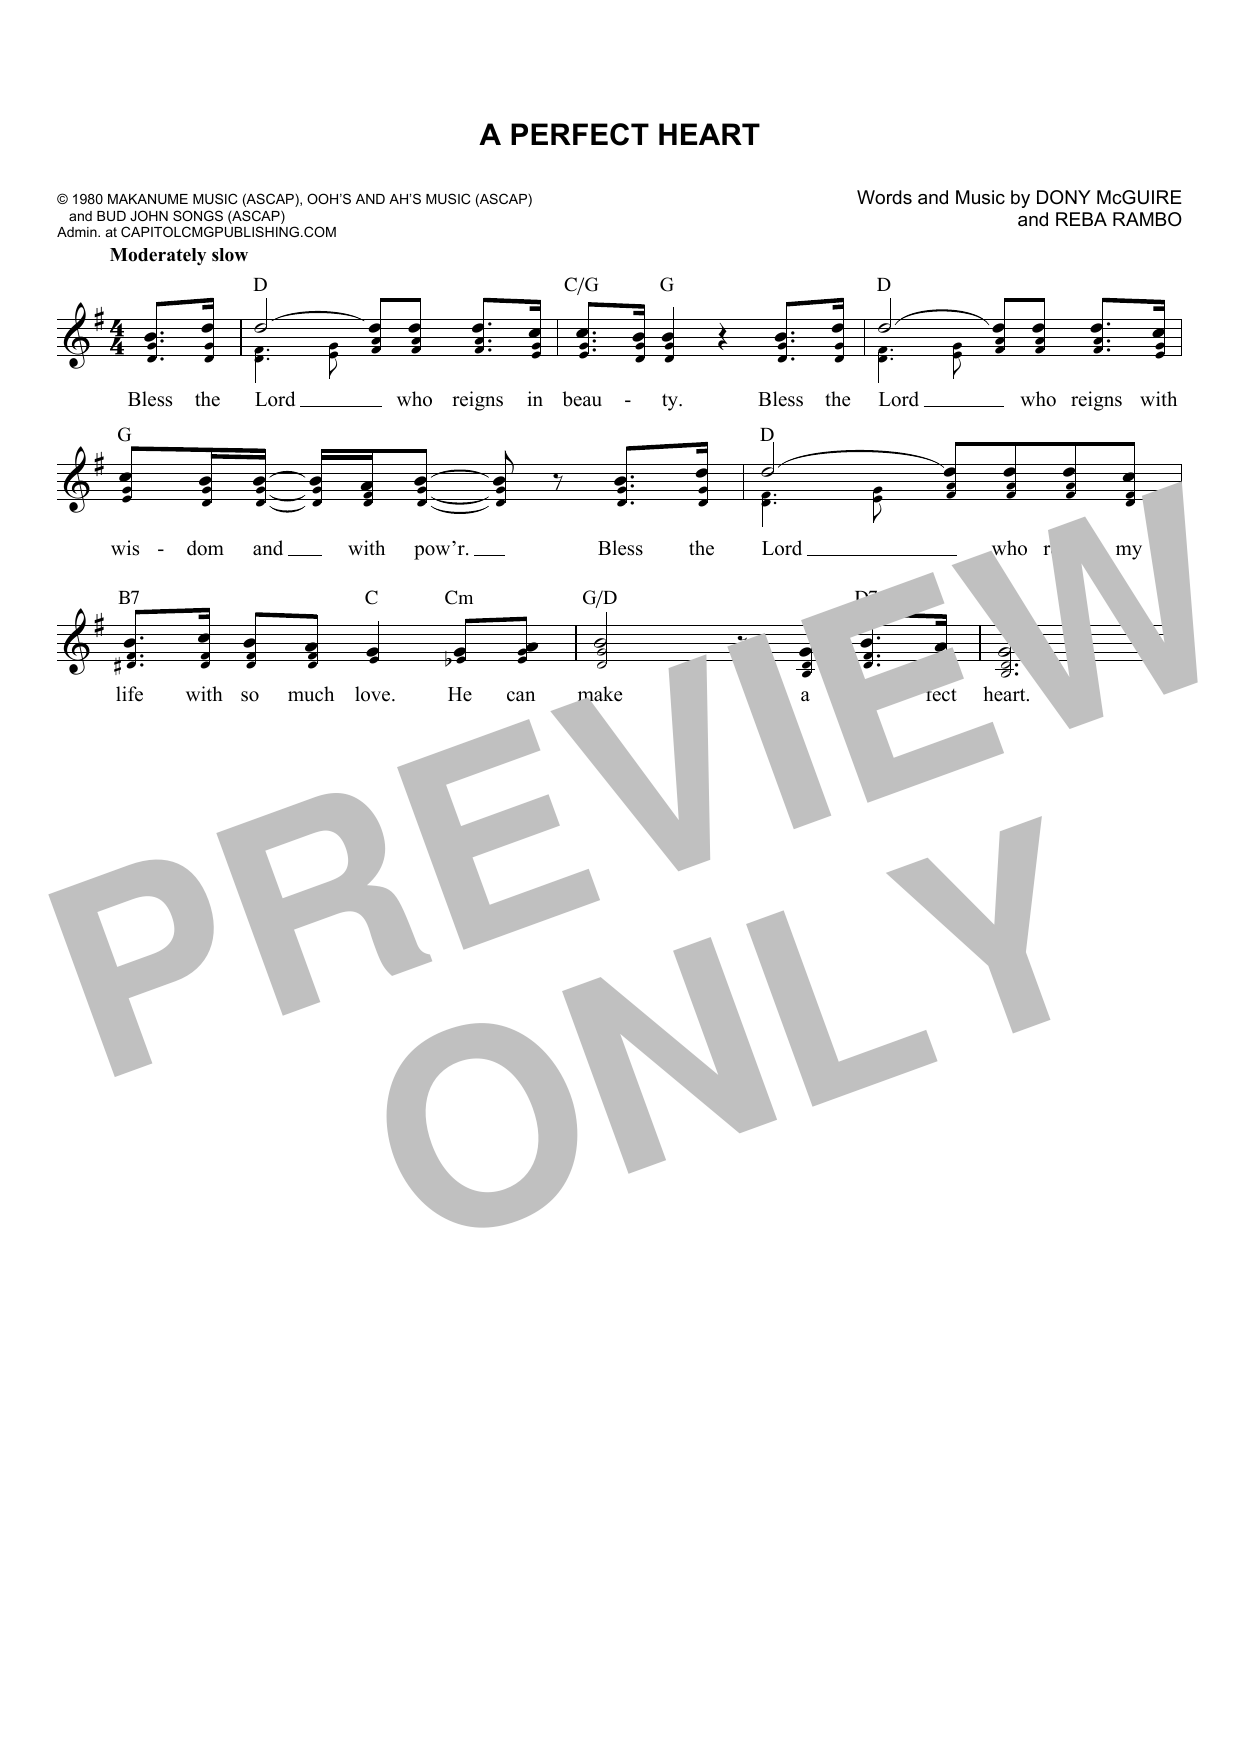 Download Dony McGuire A Perfect Heart Sheet Music